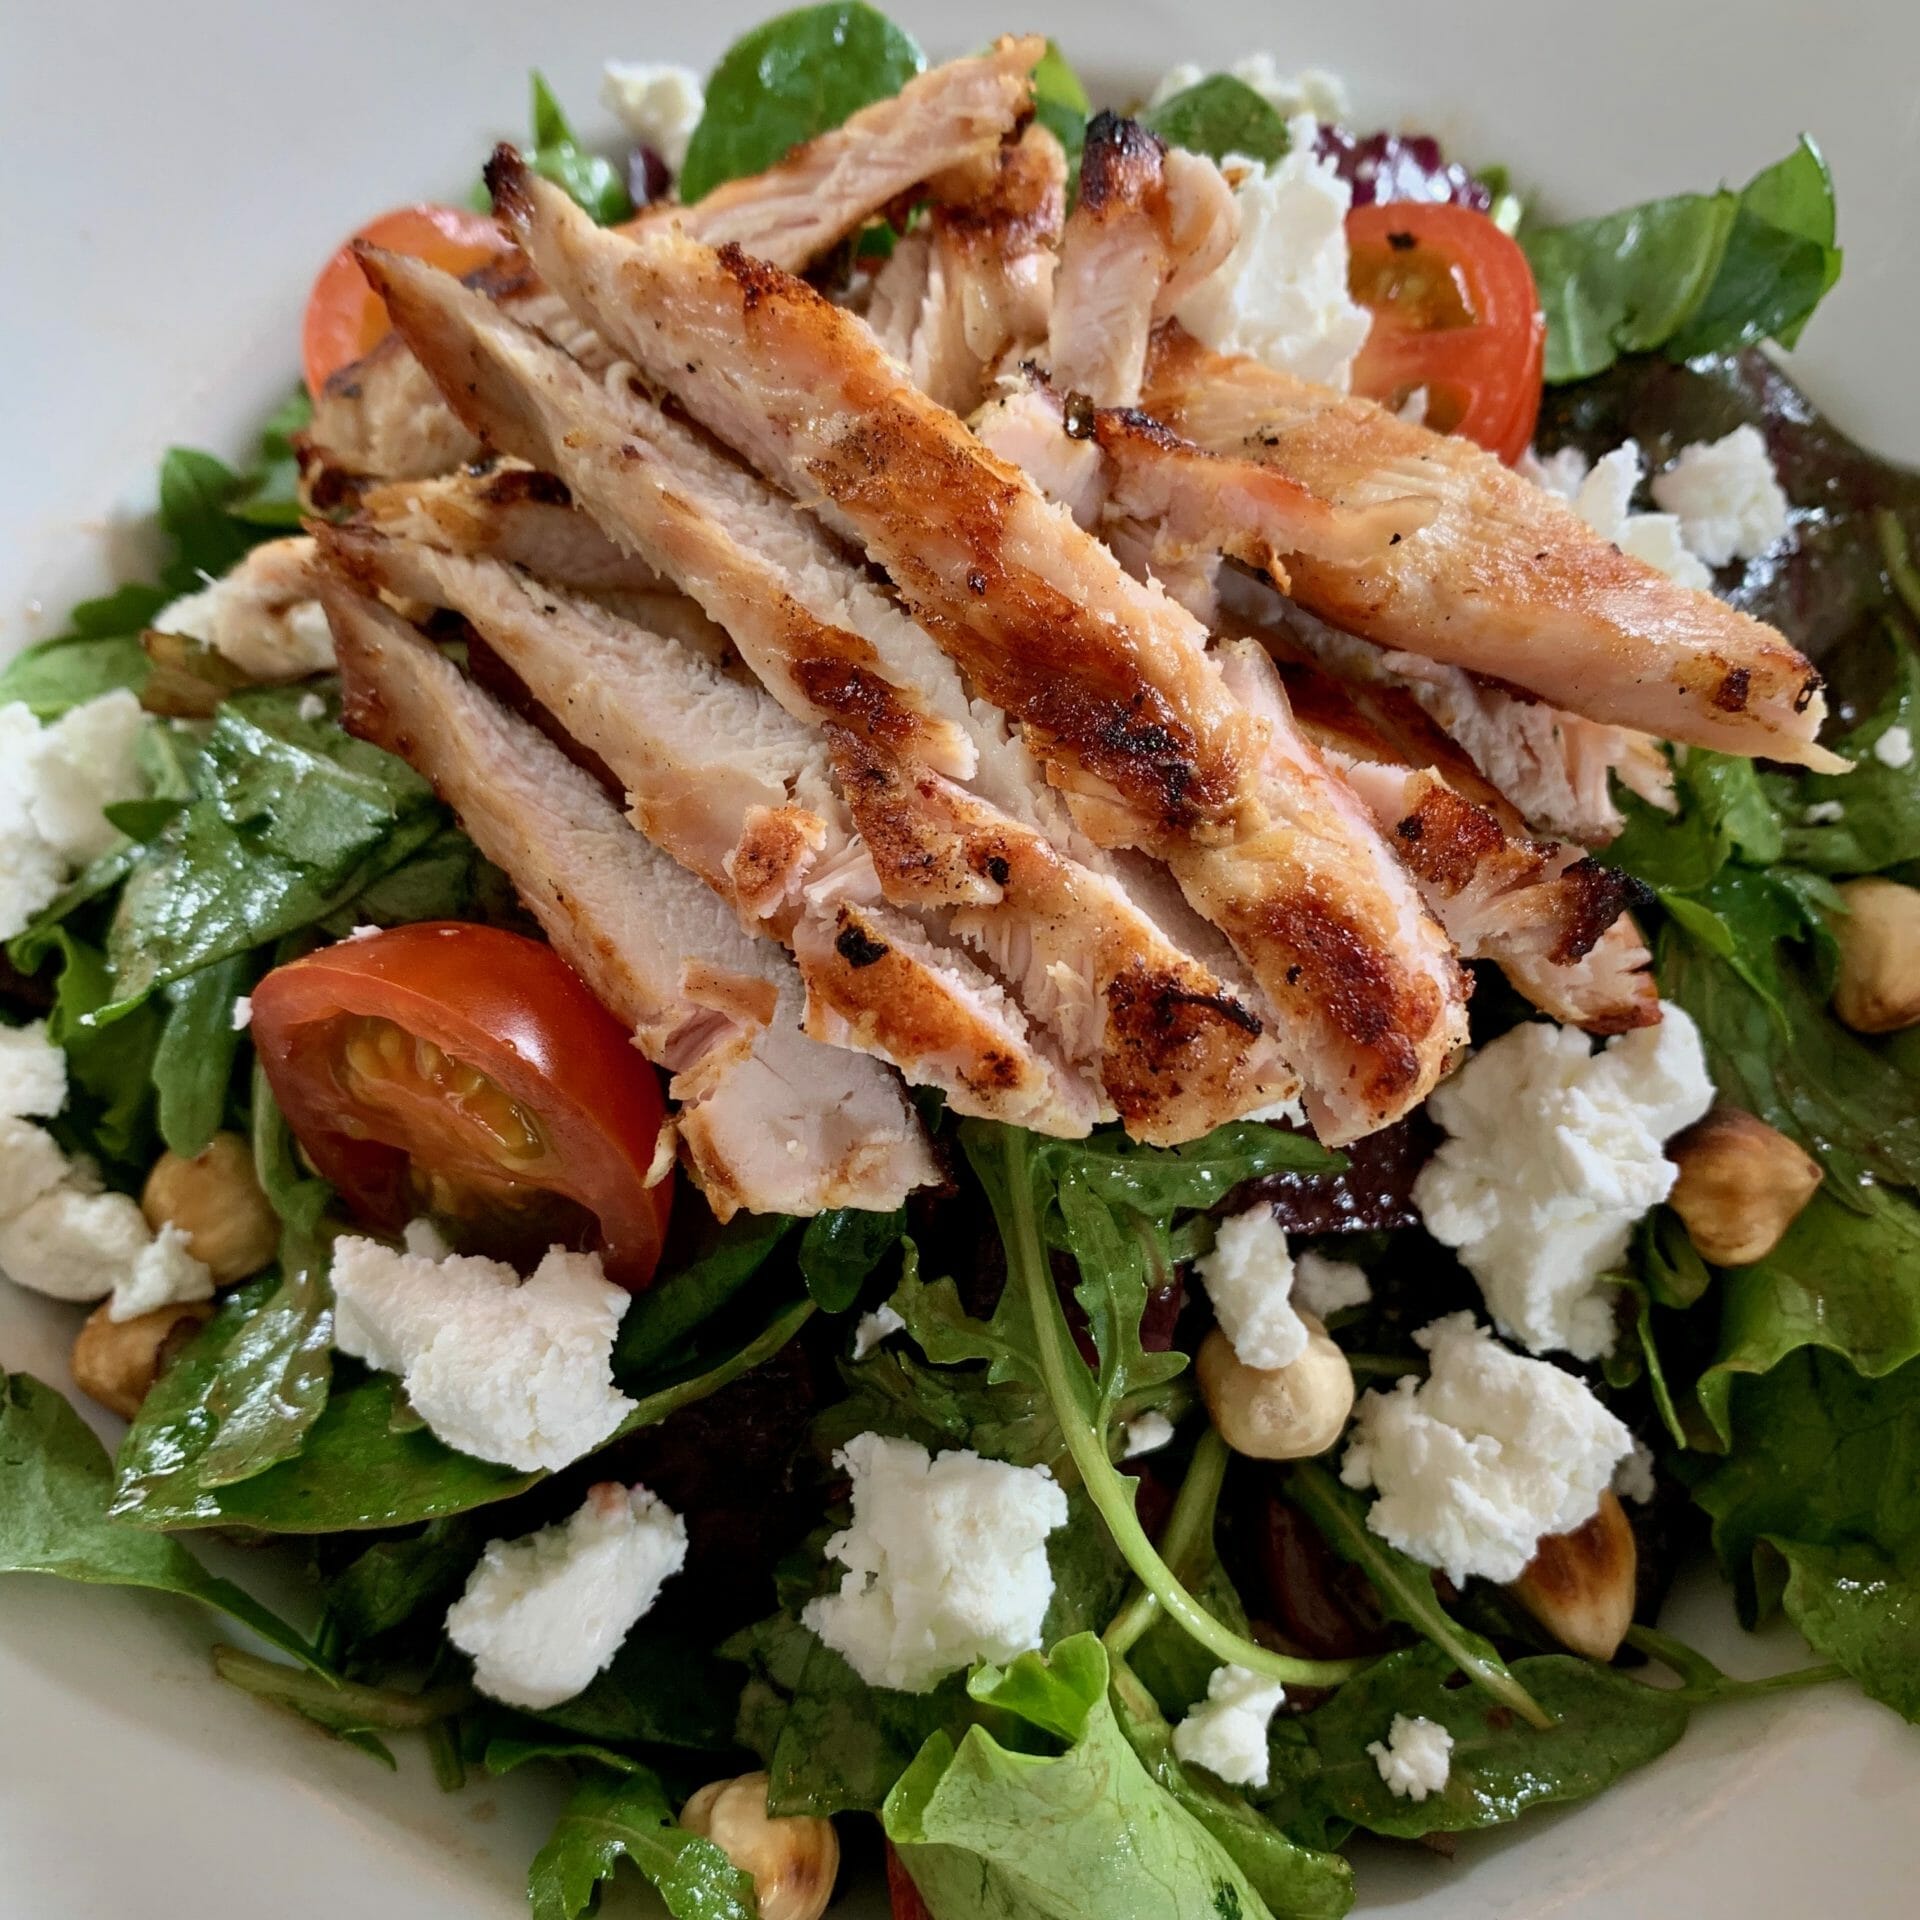 Mixed salad with grill chicken strips, goat cheese, hazelnuts, beets and tomatoes